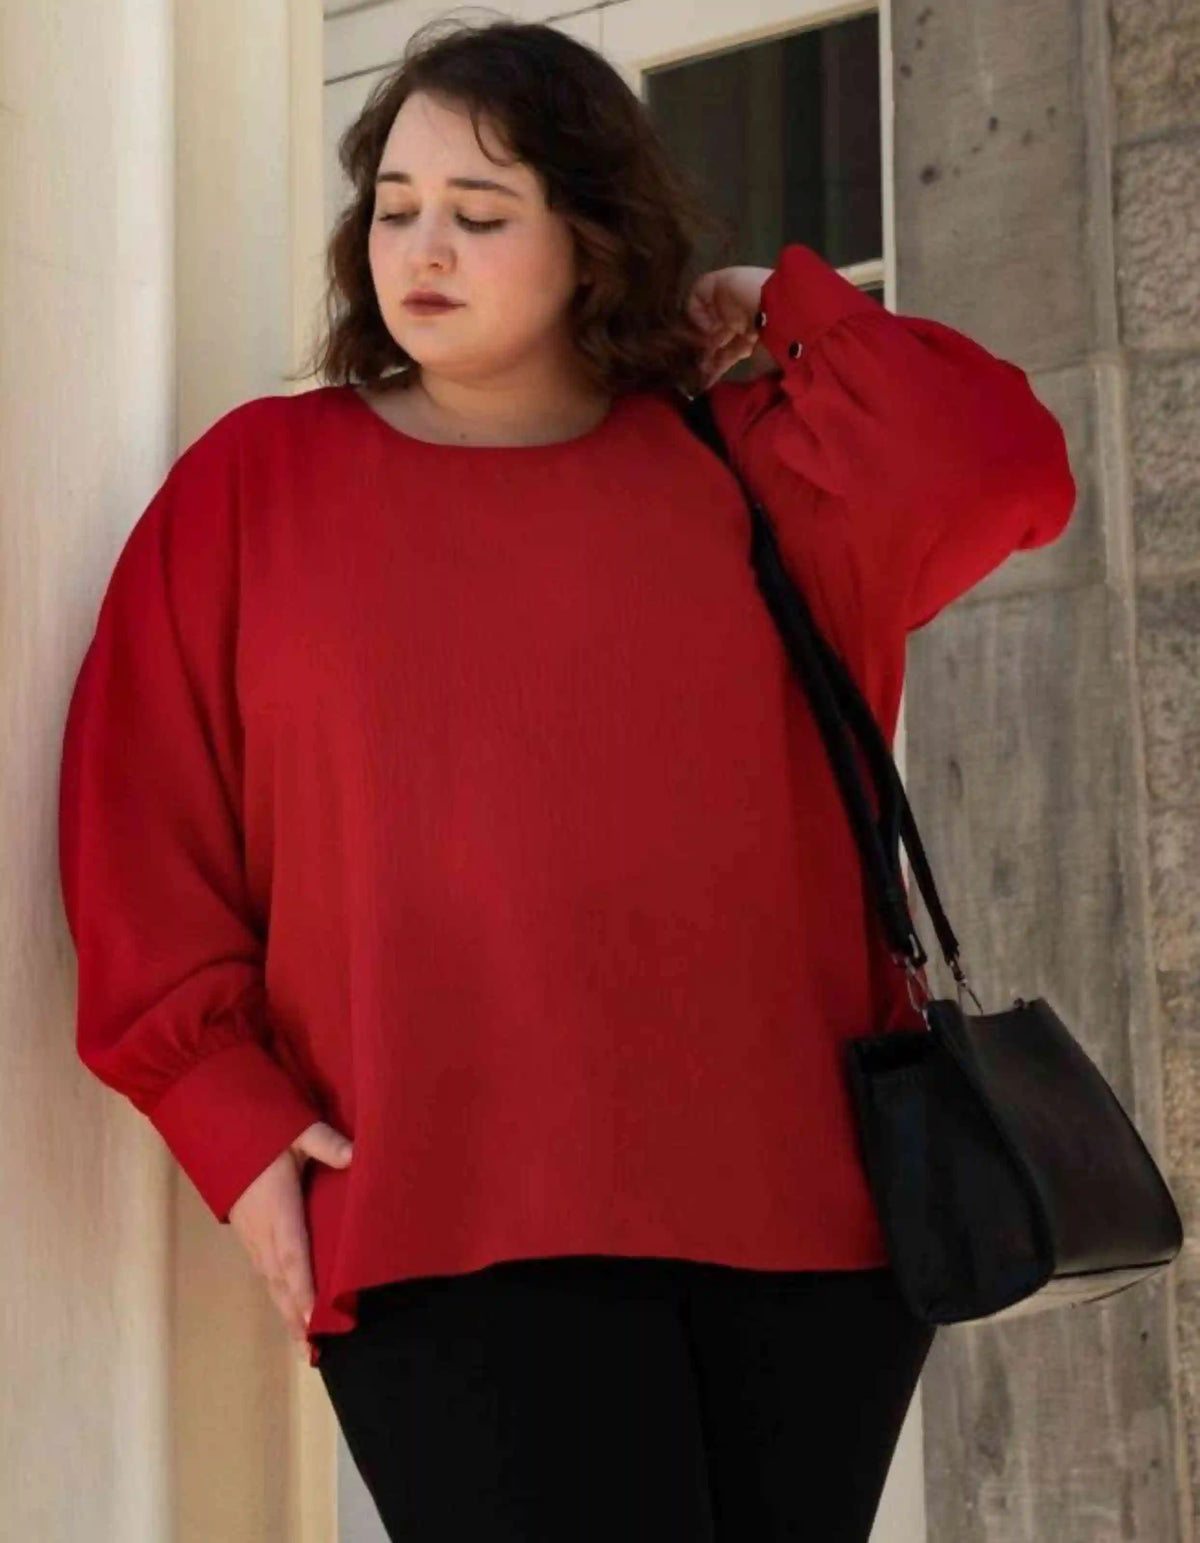 Eloise Oversized Blouse Long Sleeves Solid